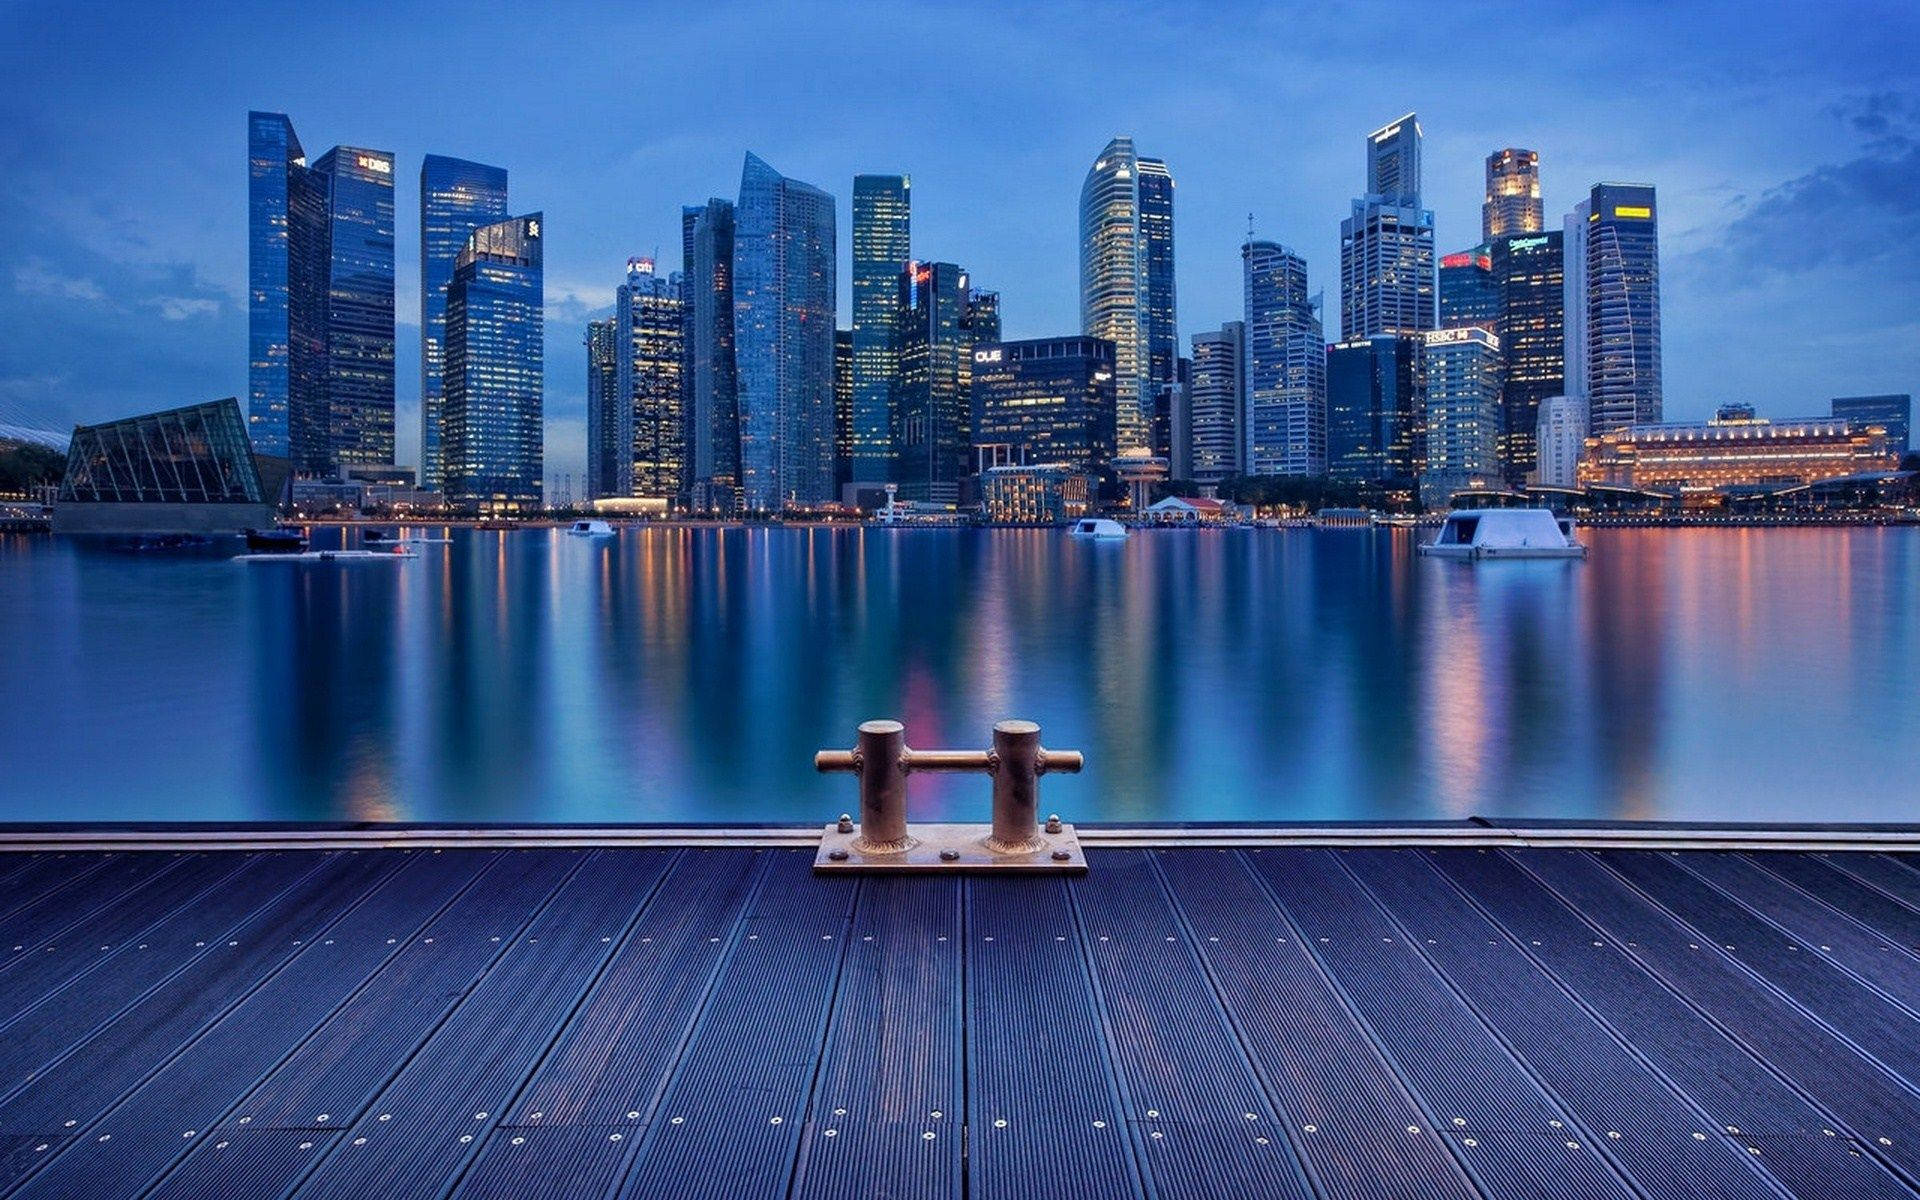 Download Singapore Skyline And River City Background Wallpaper | Wallpapers .com